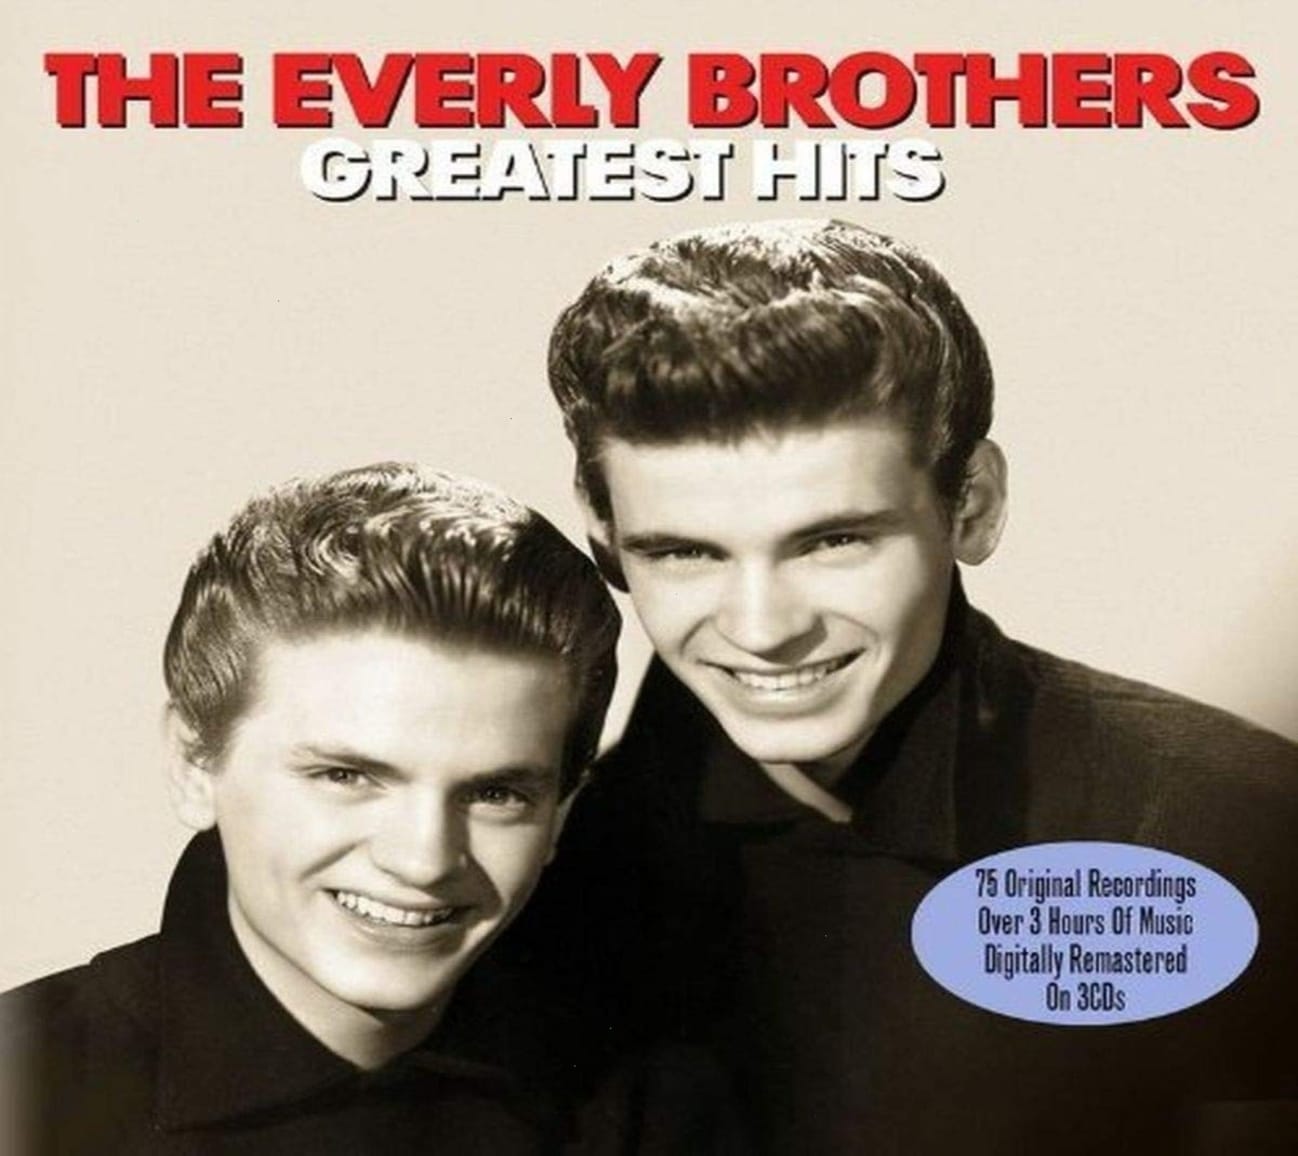 The Everly Brothers – Greatest Hits (CD) on MovieShack